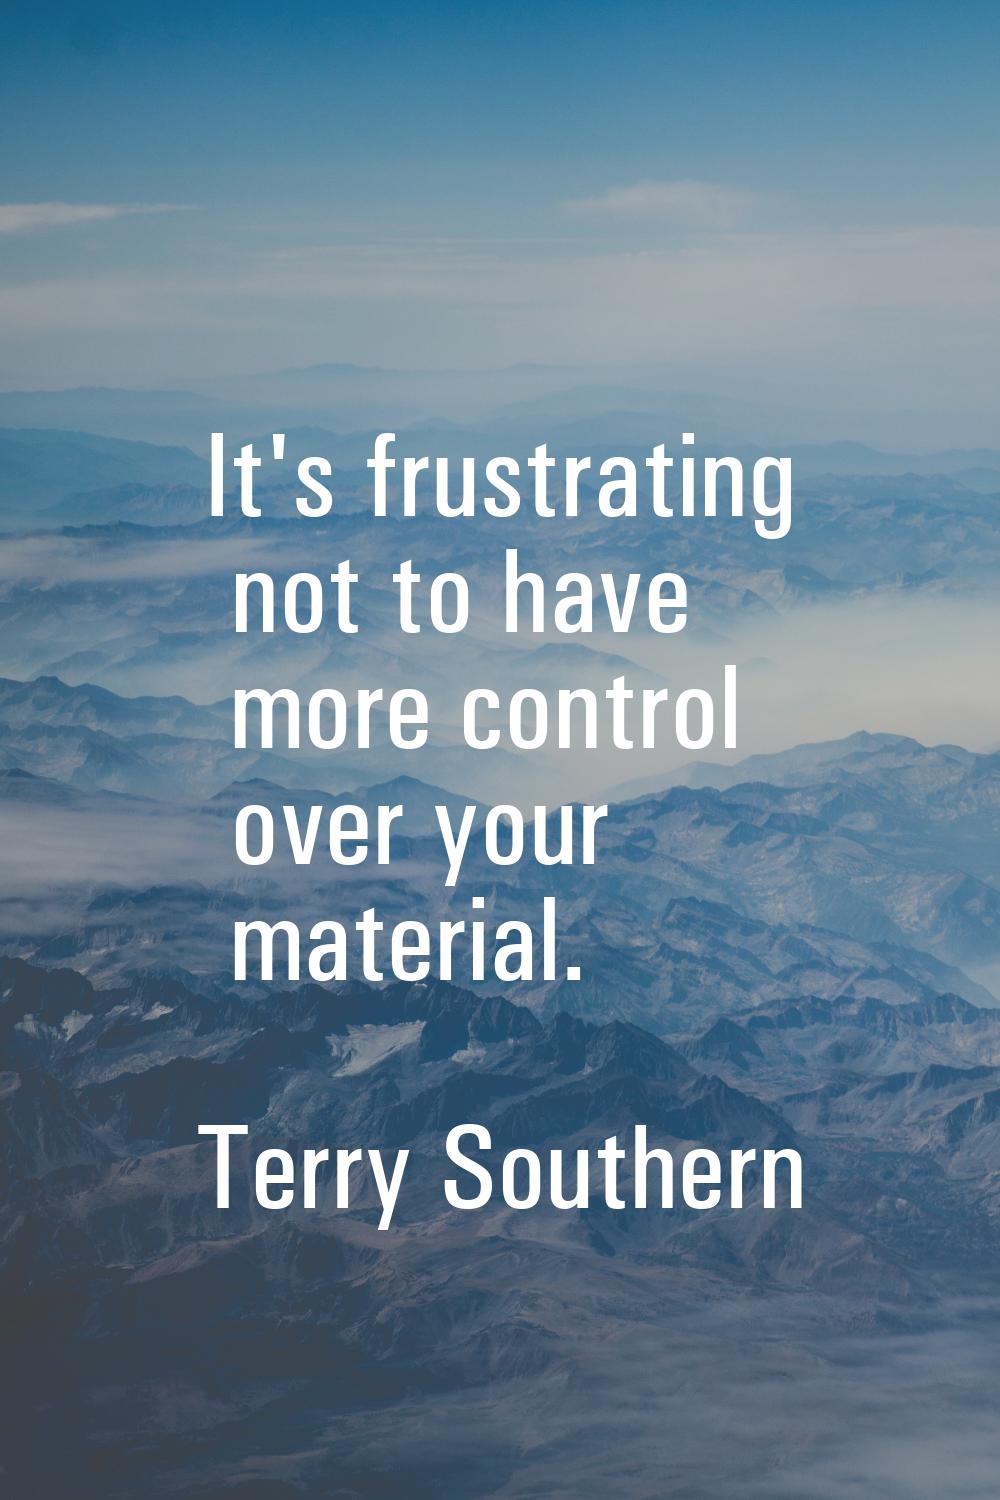 It's frustrating not to have more control over your material.